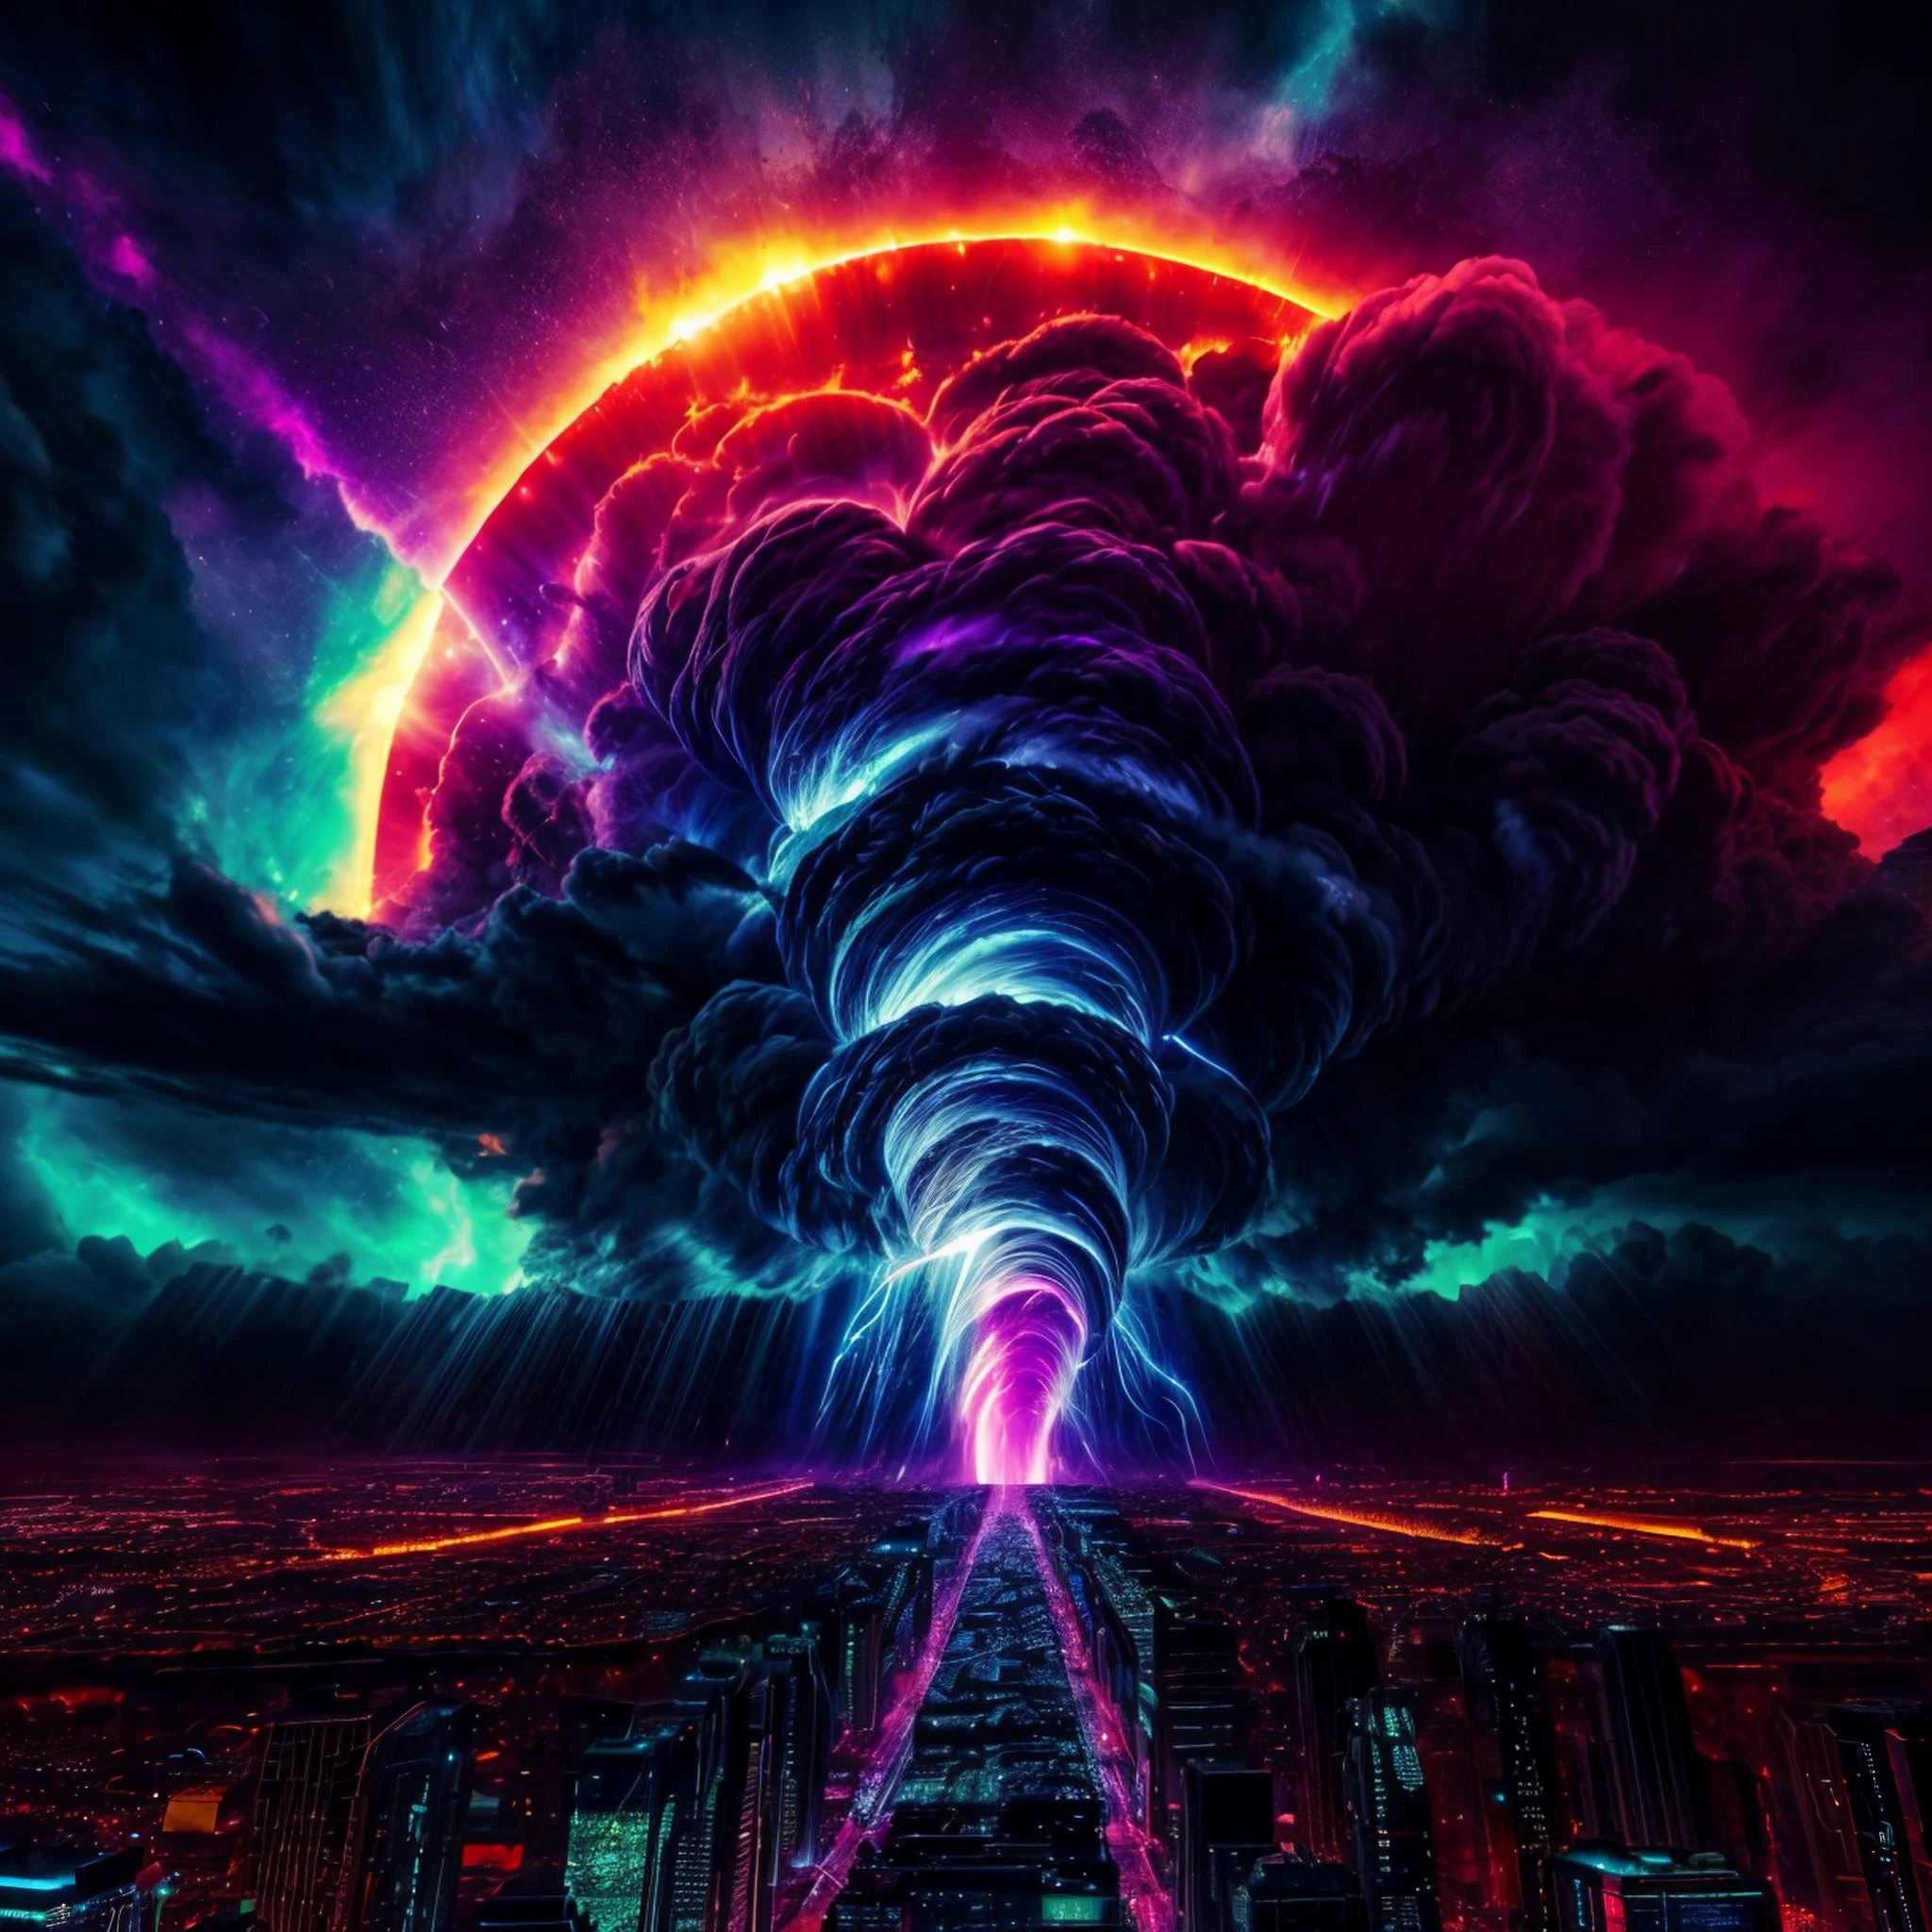 circuitboard, apocalyptic city, tornado, sun rays, Contained Color, cyberpunk style,epic style,backround is epic colorful nebula space, GLOWING STYLE, GLOWING LIGHTS,GLOWING  NEON LIGHTS